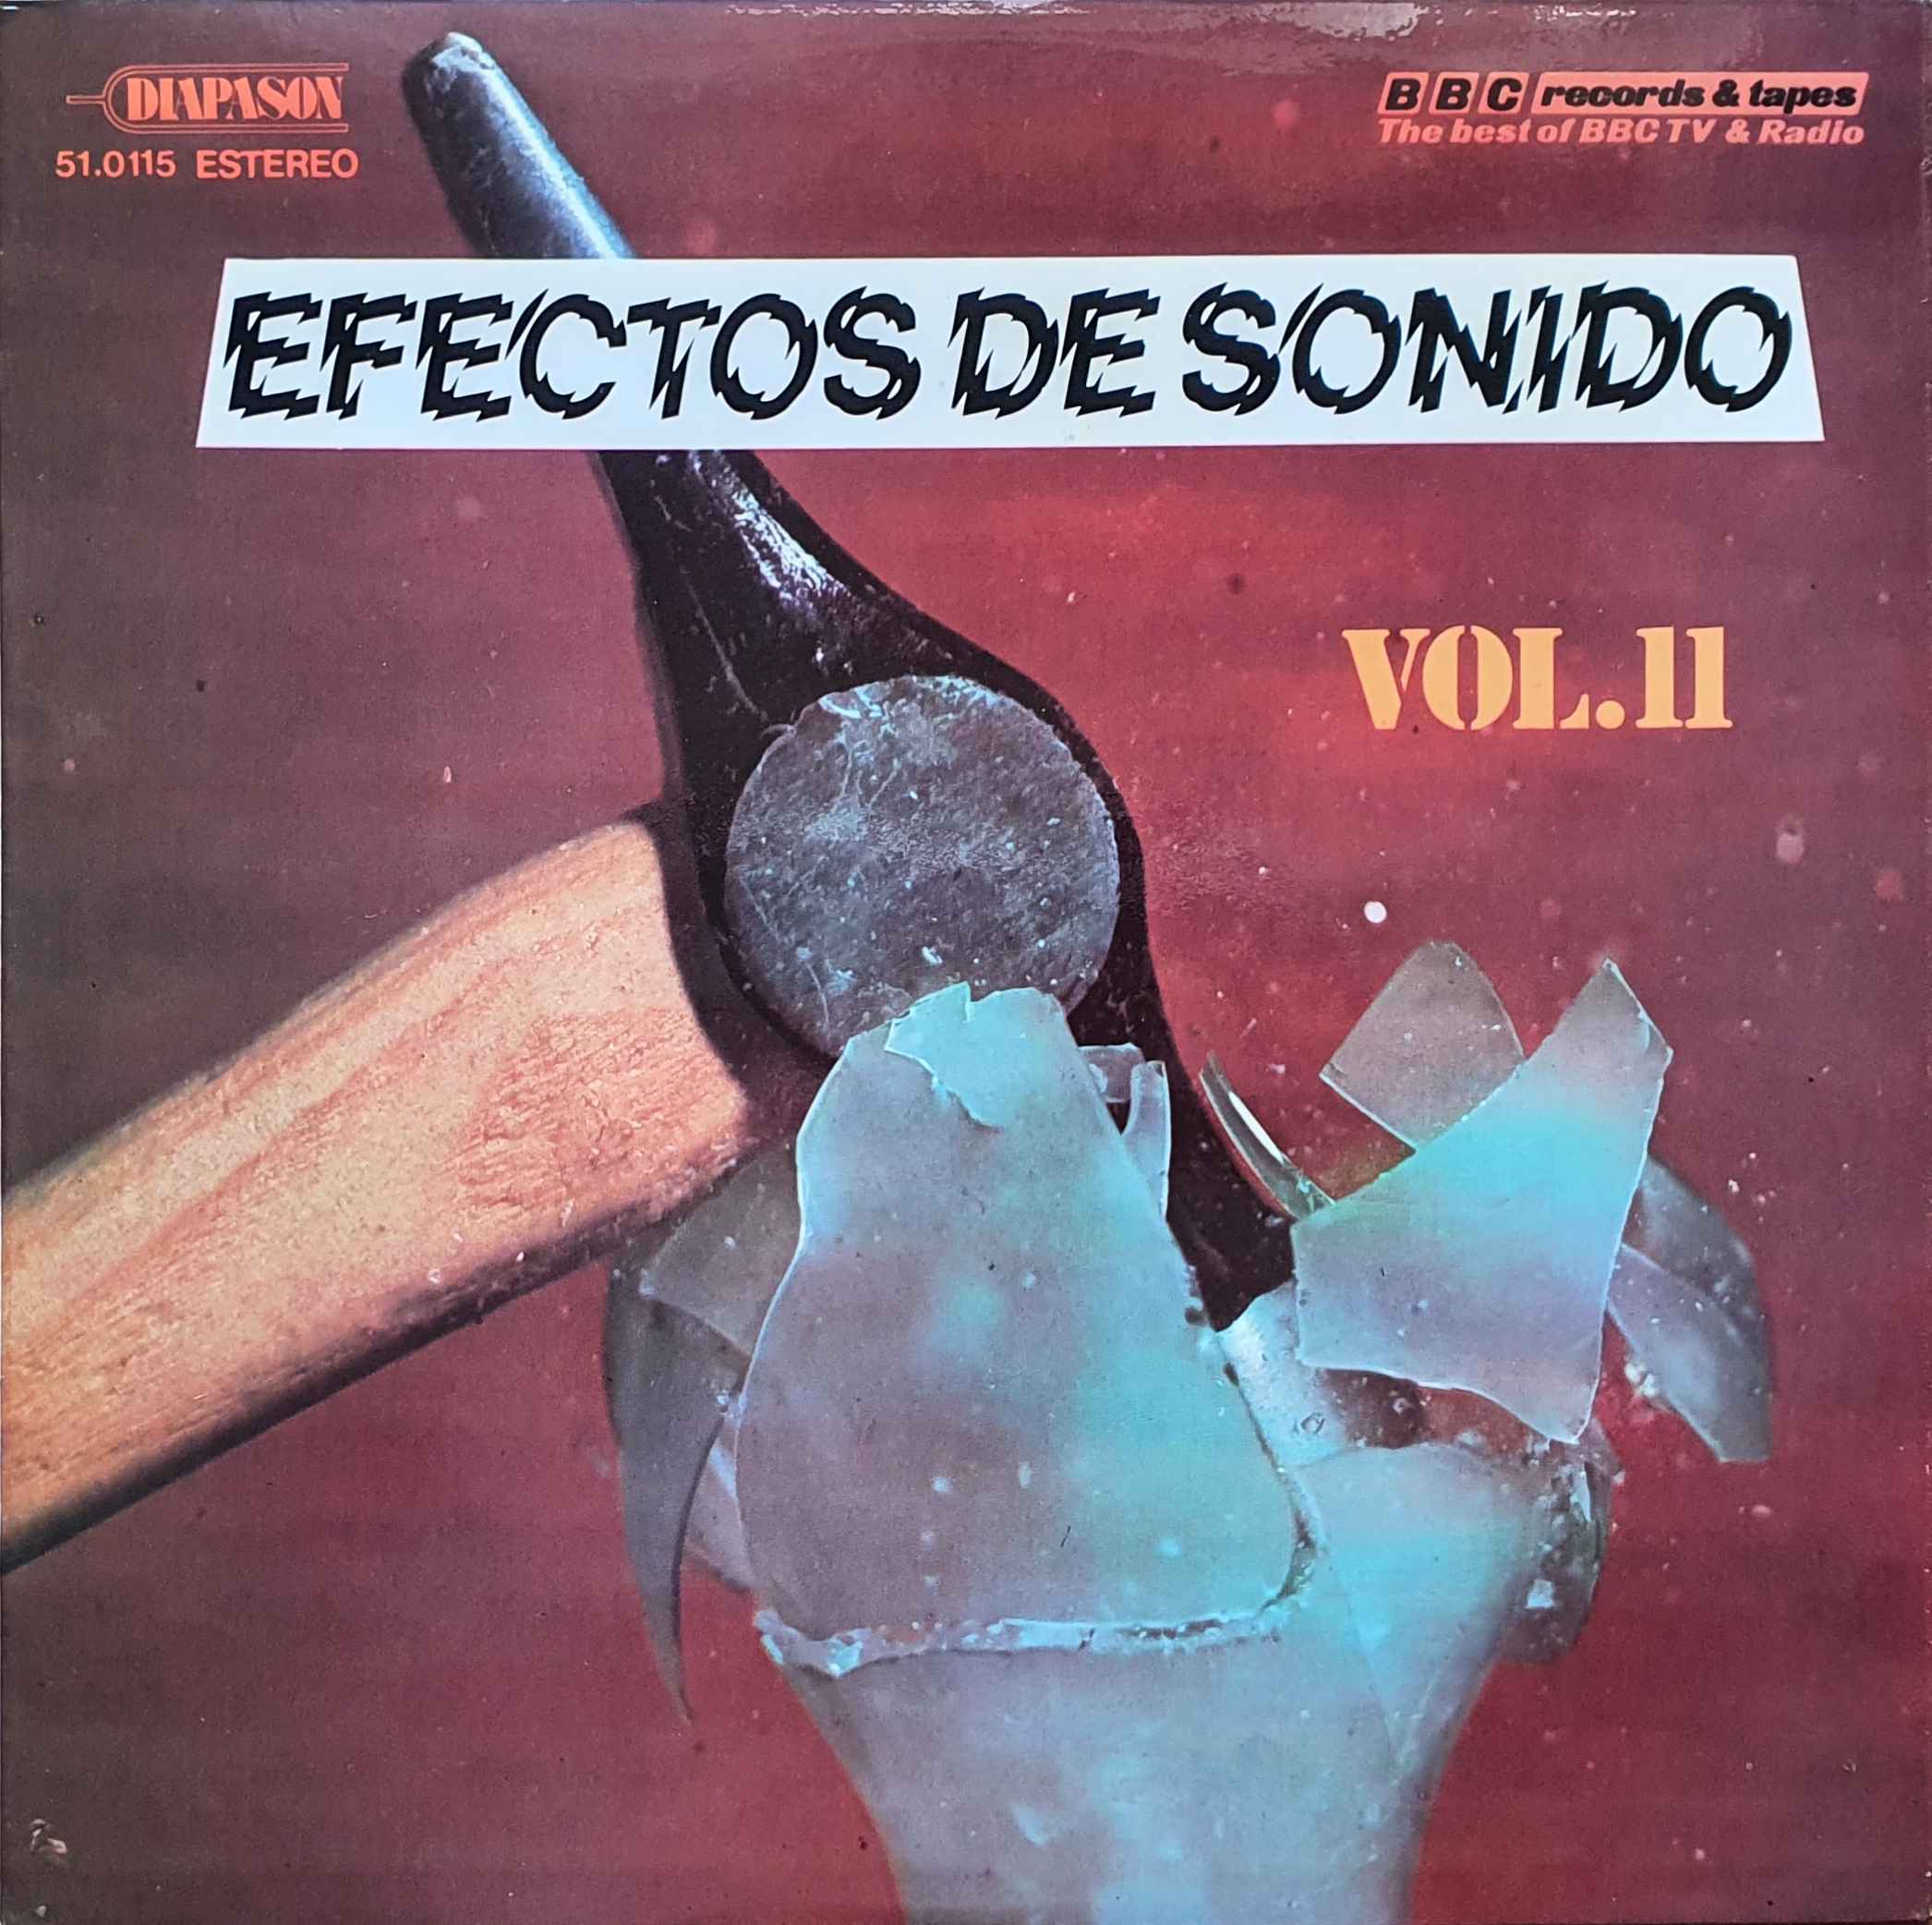 Picture of 51.0115 Efectos de sonido Vol.11  (Spanish import) by artist Various from the BBC albums - Records and Tapes library